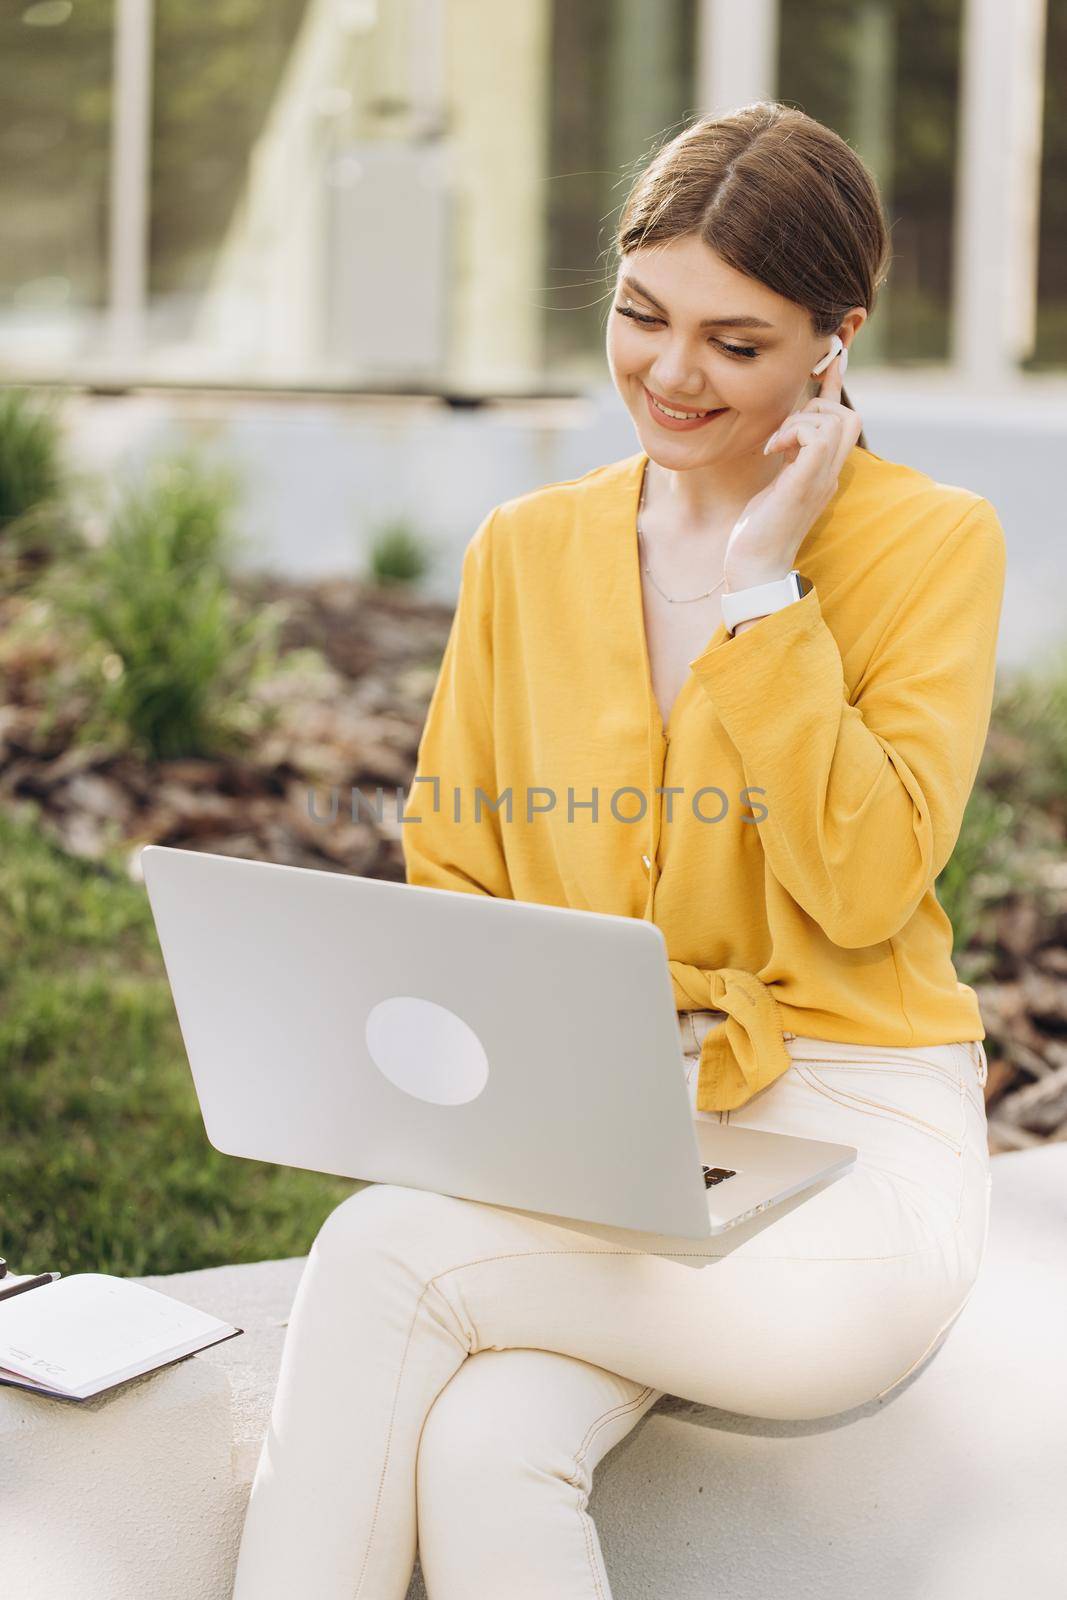 Happy european girl enjoying break time and soft dance. Portrait of beautiful young caucasian woman listening to favorite music in wireless headphones while sitting on bench using laptop computer.